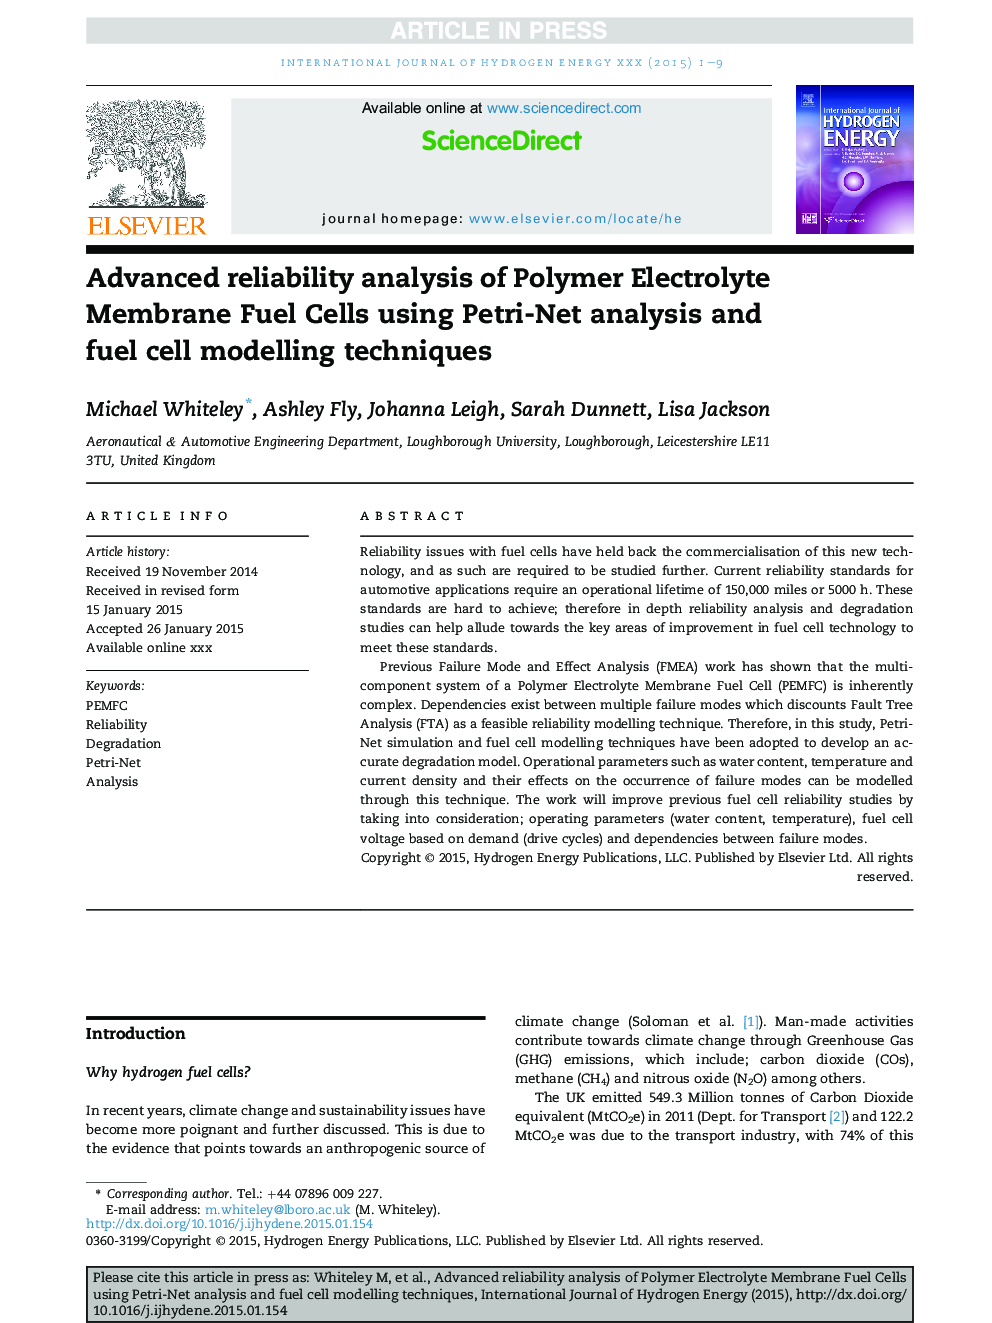 Advanced reliability analysis of Polymer Electrolyte Membrane Fuel Cells using Petri-Net analysis and fuel cell modelling techniques